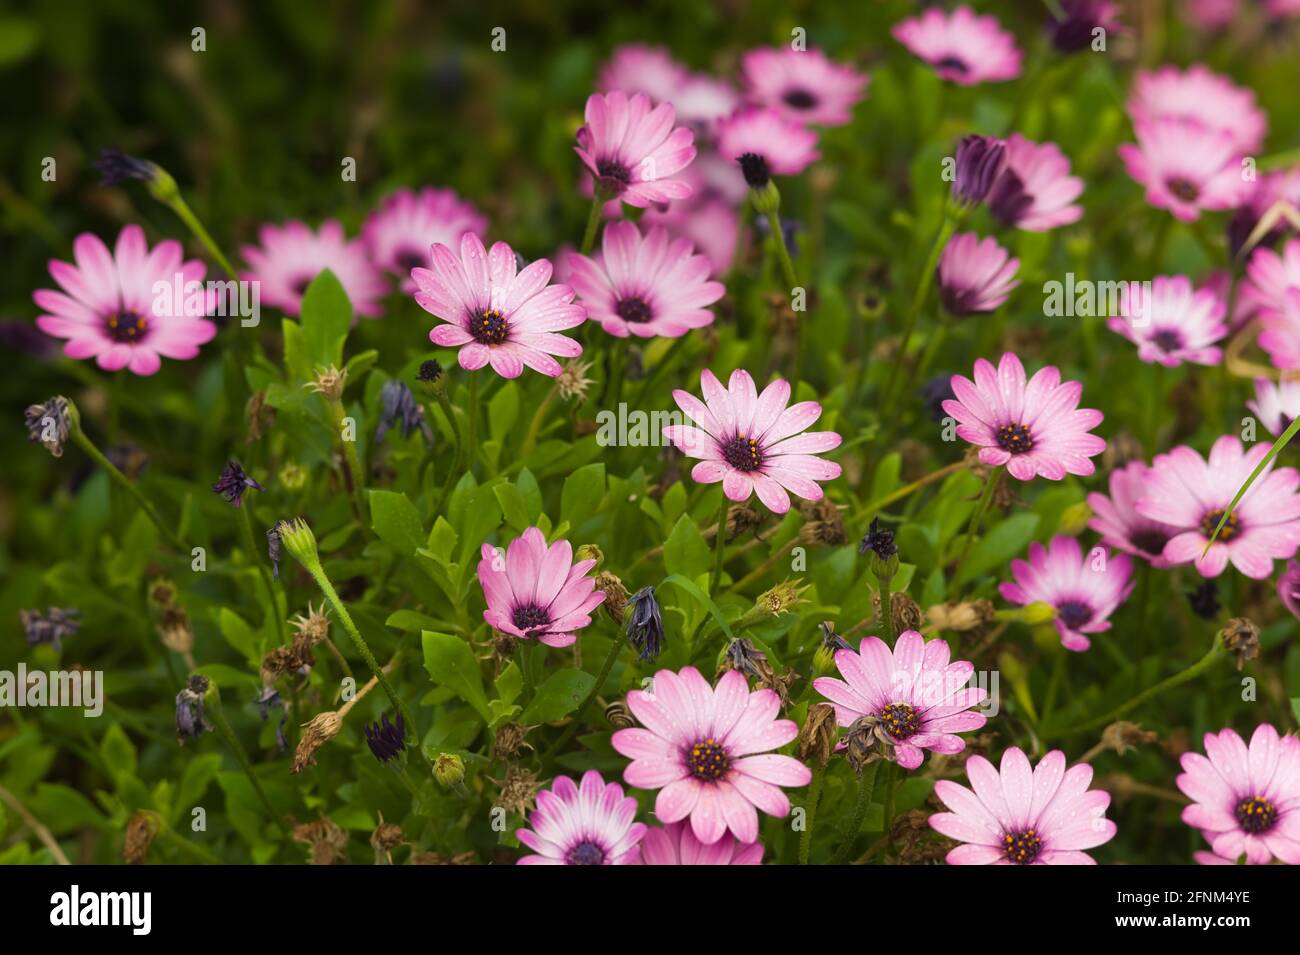 A field of Pink Dimorphotheca ecklonis or Cape daisy flowers in a park Stock Photo